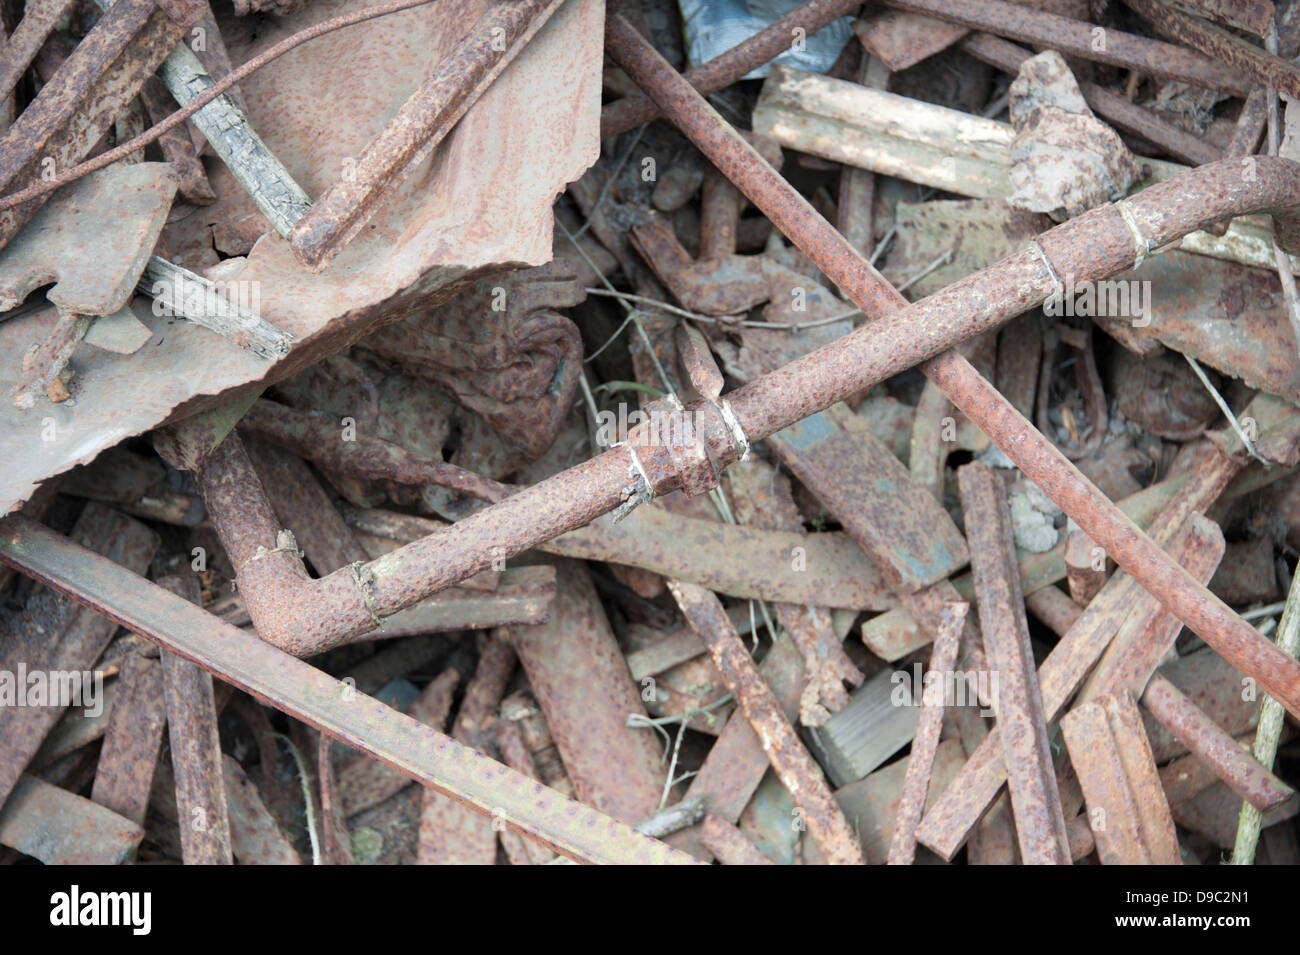 Scrap Rusted Iron Pipe Pipes Rusting Old Pile melt down for recycling Stock Photo